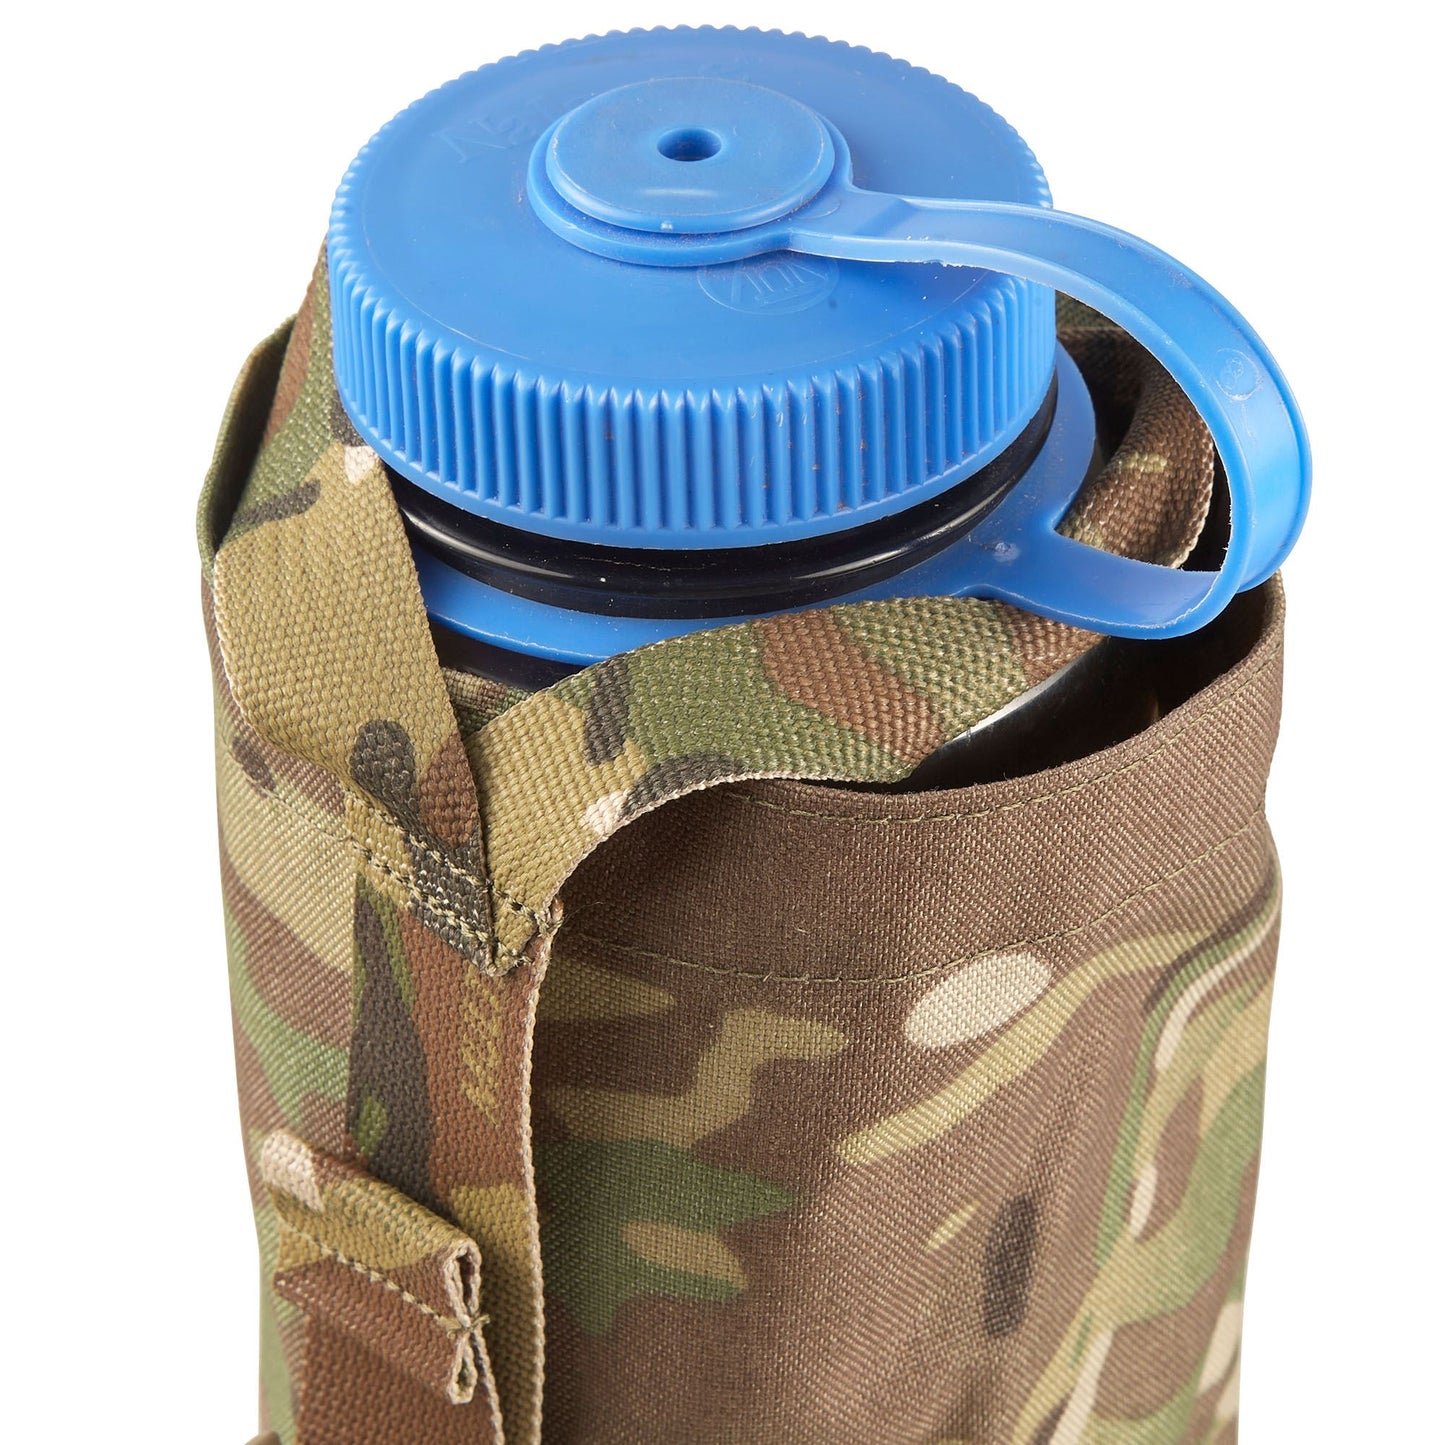 The Nalgene Bottle Pouch is designed to hold a 32oz wide or narrow mouth Nalgene bottle with a titanium cup, a 1L flask. It features a Y style strap with an ITW side release buckle to secure the bottle. www.defenceqstore.com.au